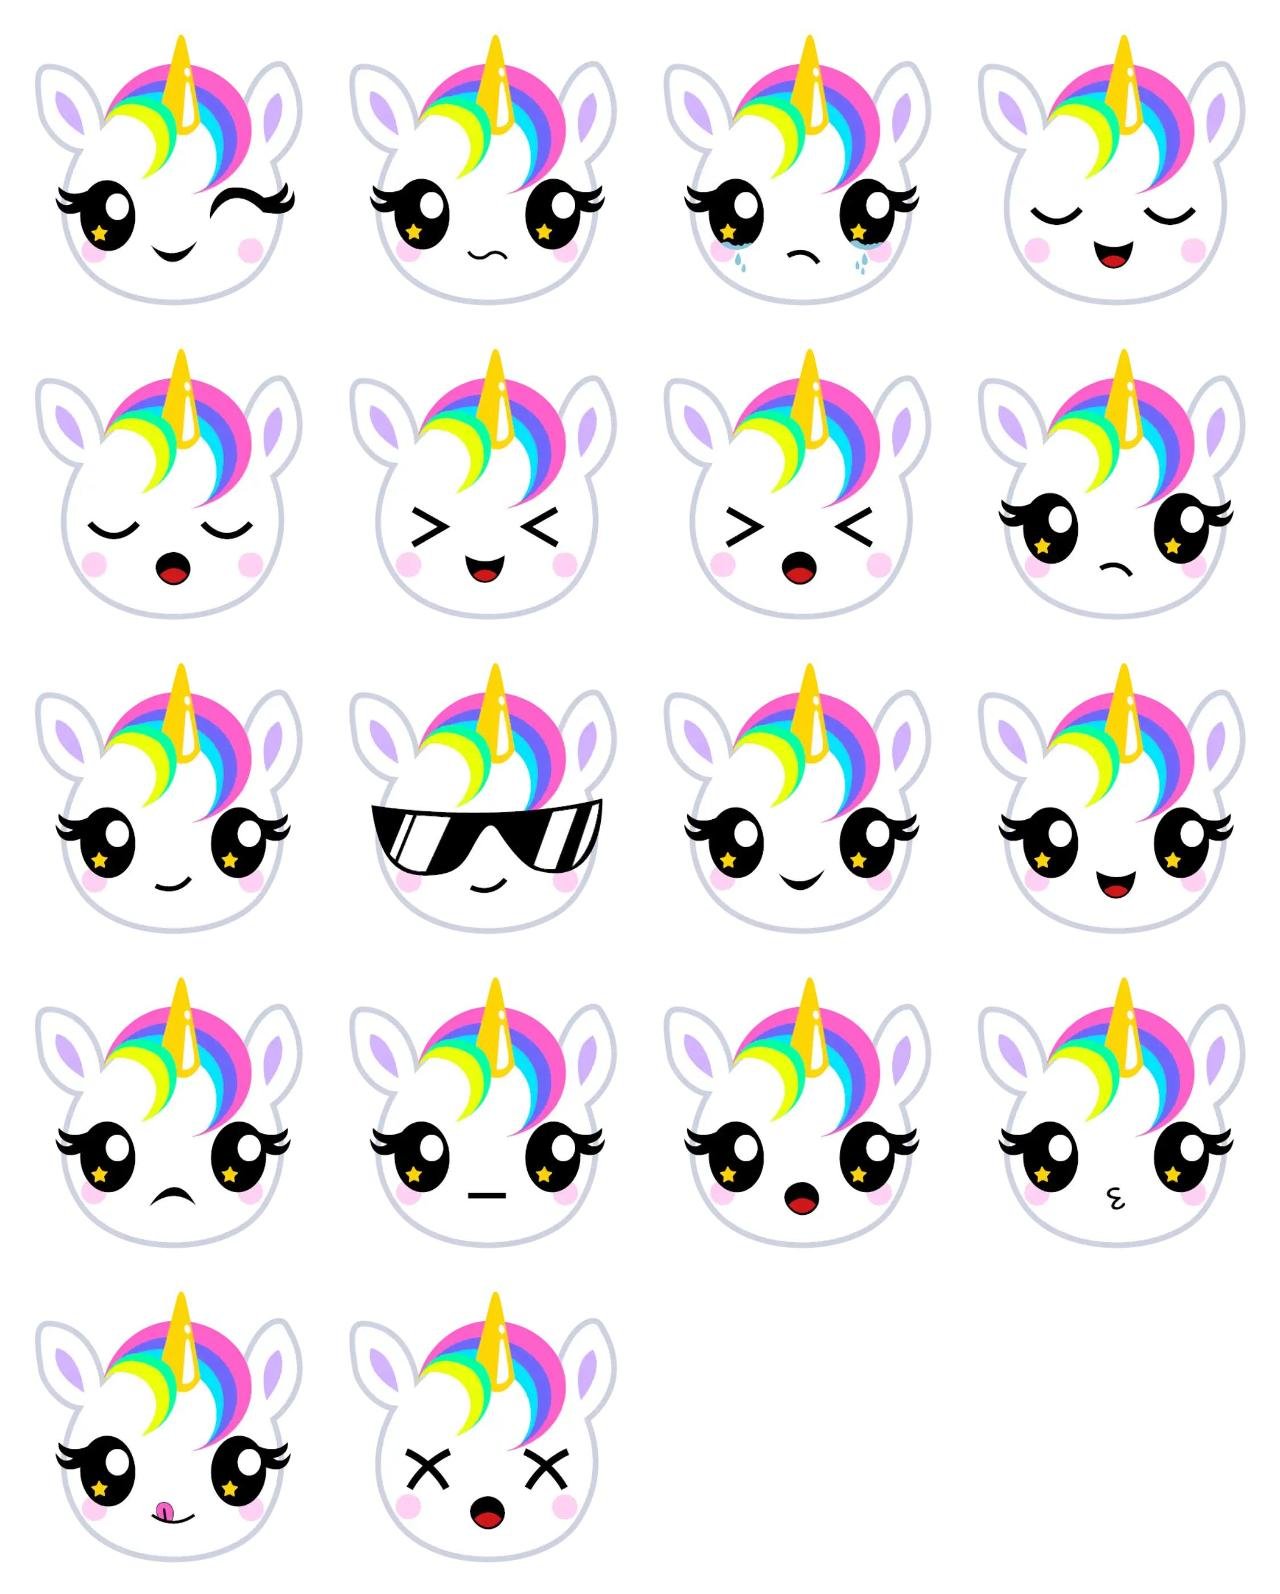 Moody Unicorn Animation/Cartoon,Gag sticker pack for Whatsapp, Telegram, Signal, and others chatting and message apps